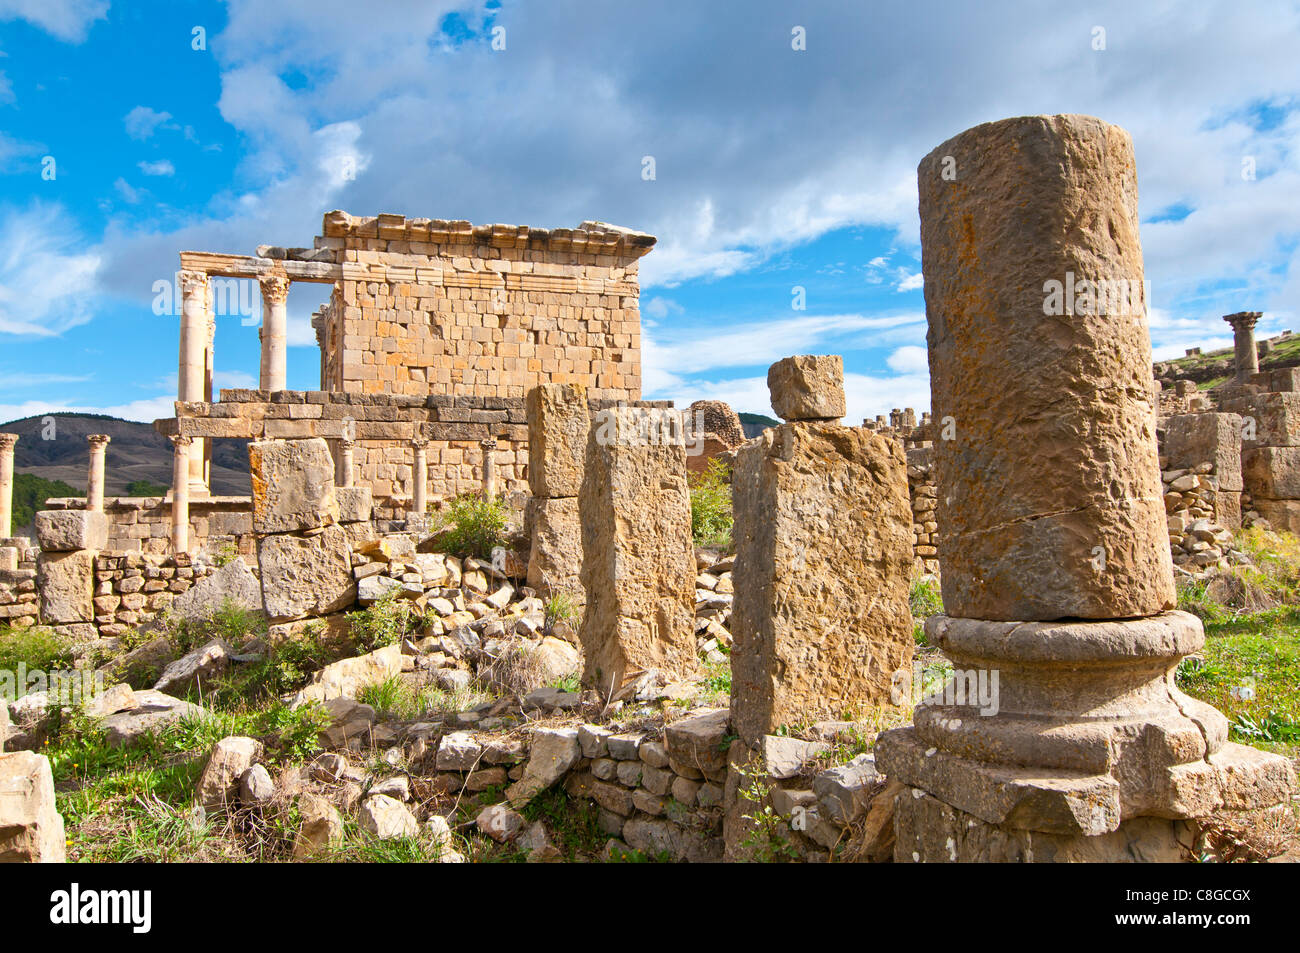 Basilica and Temple des Septimes at the Roman ruins of Djemila, UNESCO World Heritage Site, Algeria, North Africa Stock Photo